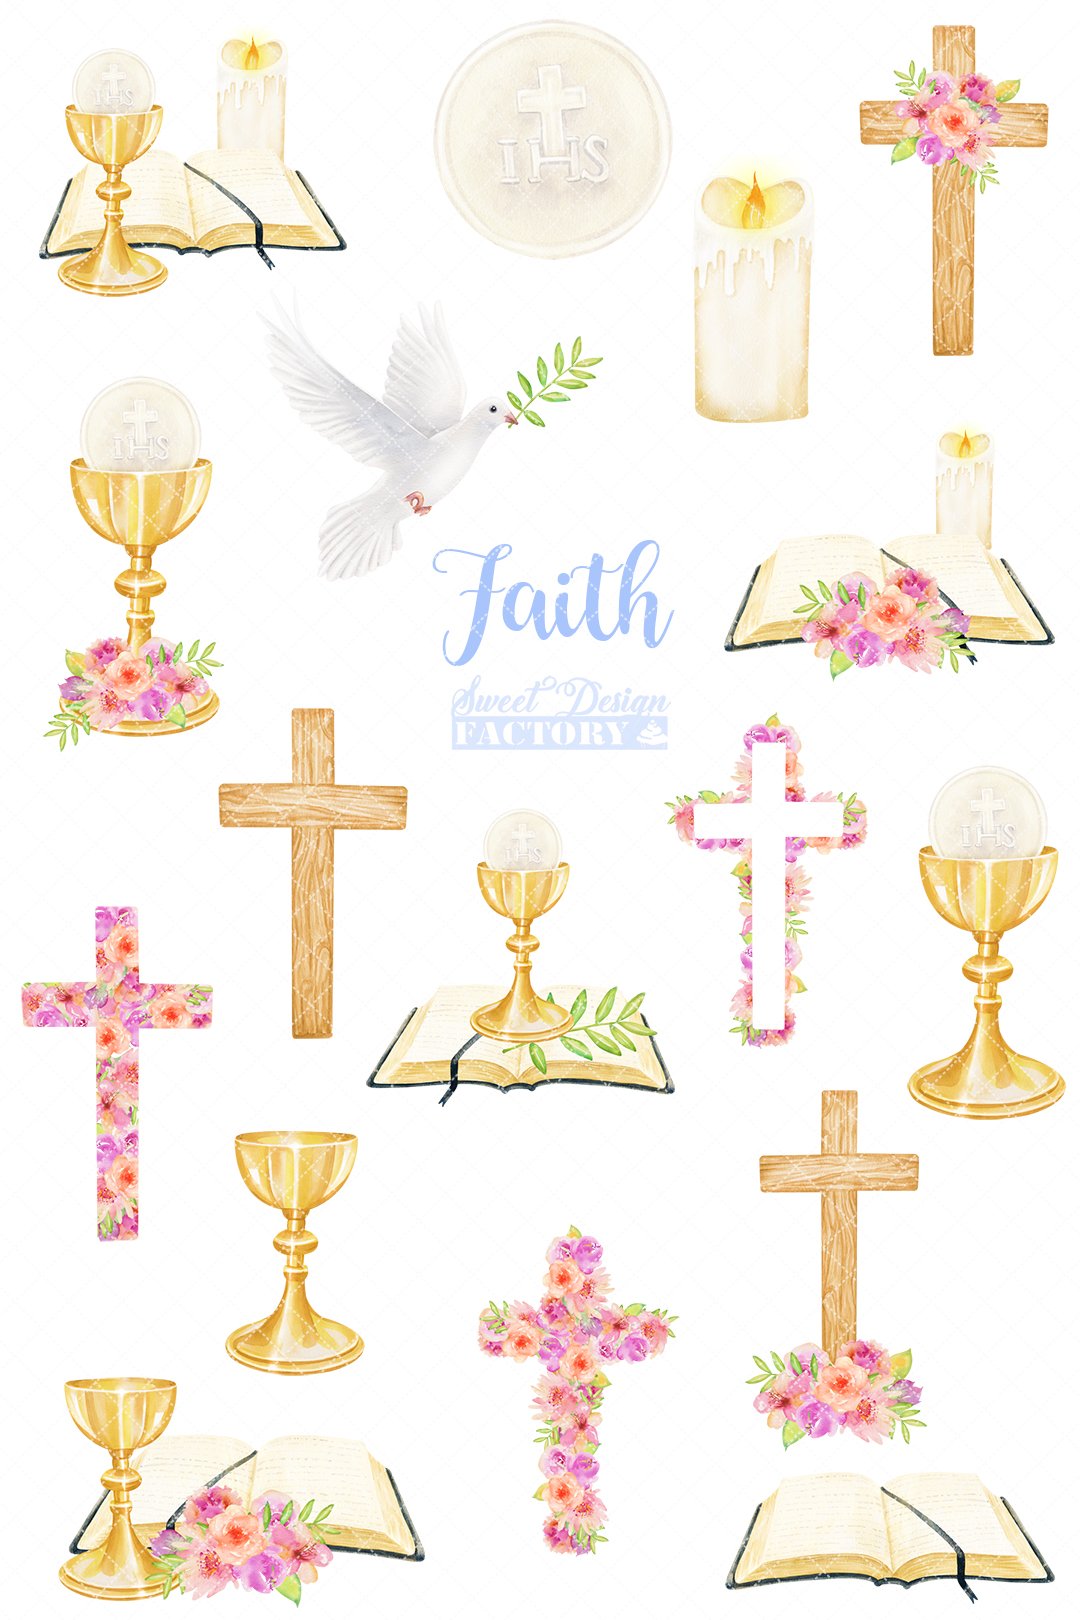 Religious icons watercolor cliparts preview image.